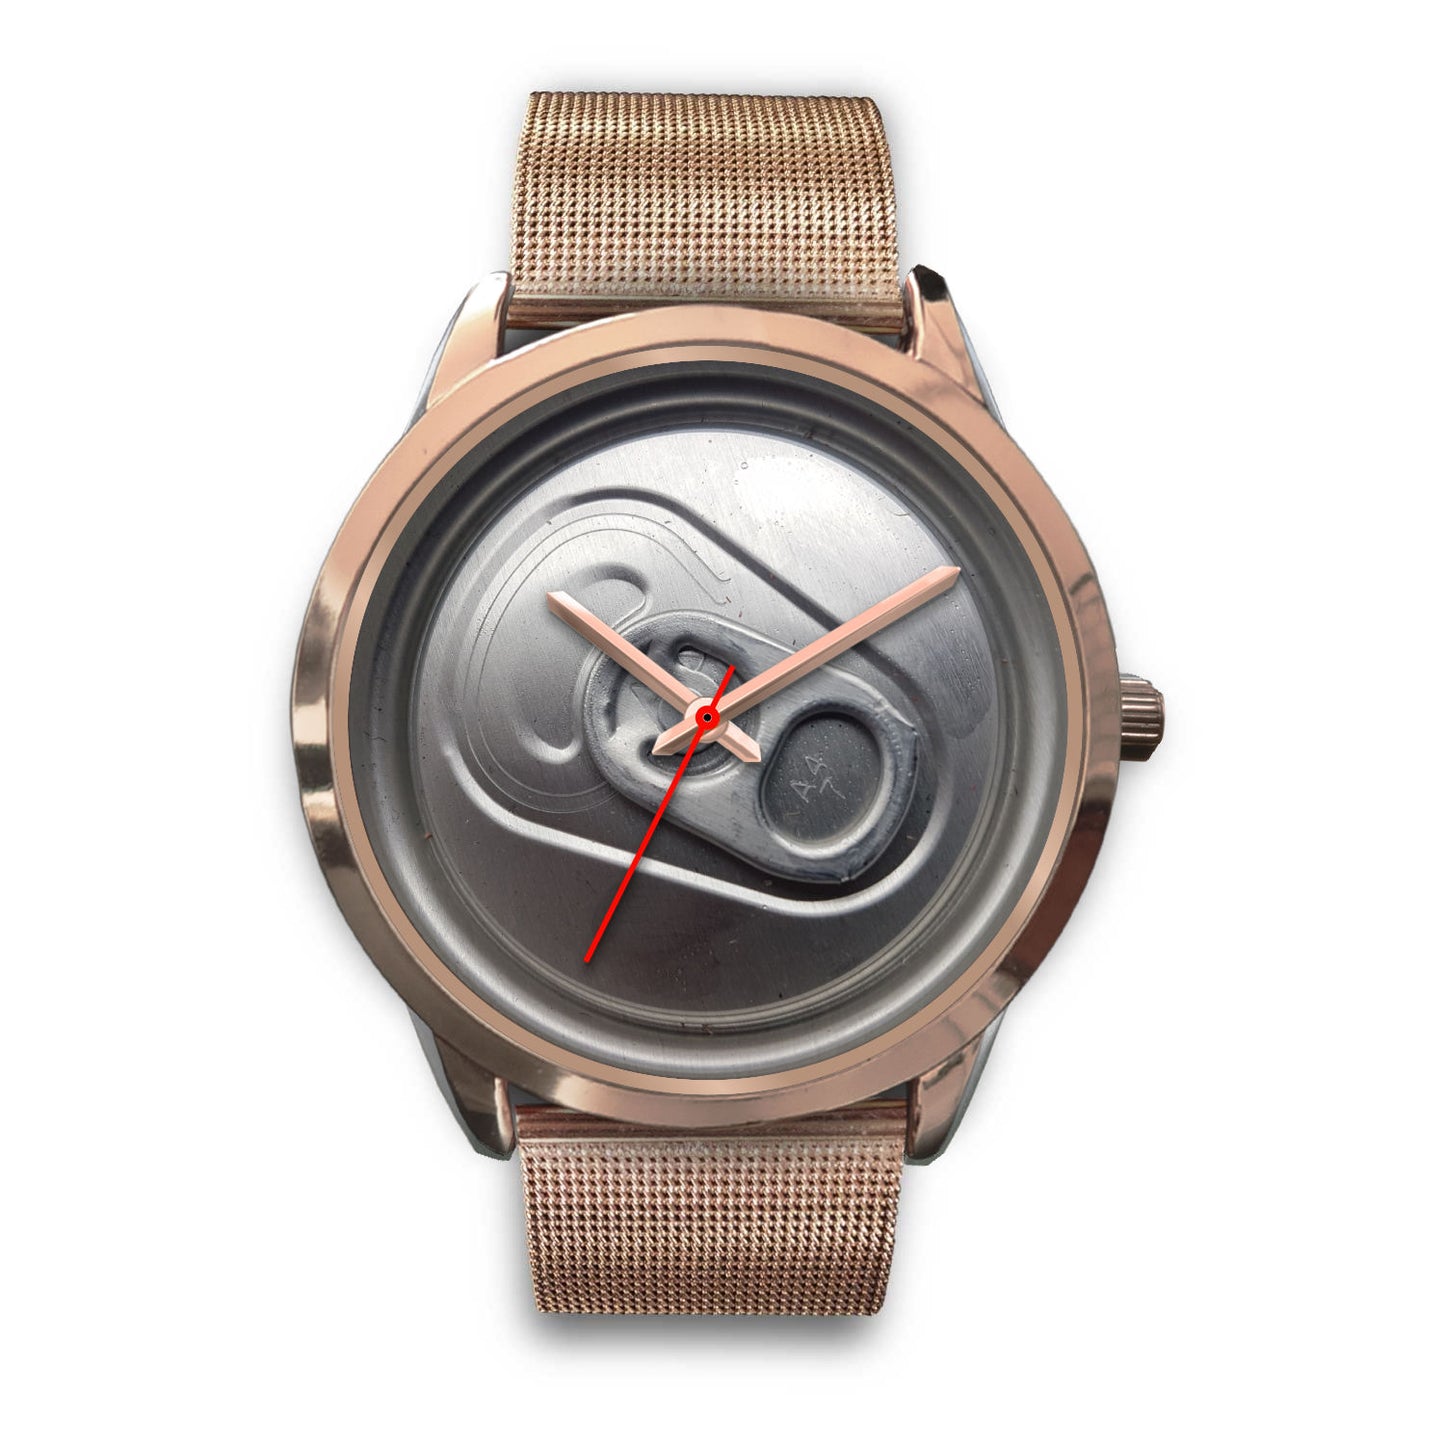 Beer time watch rose gold